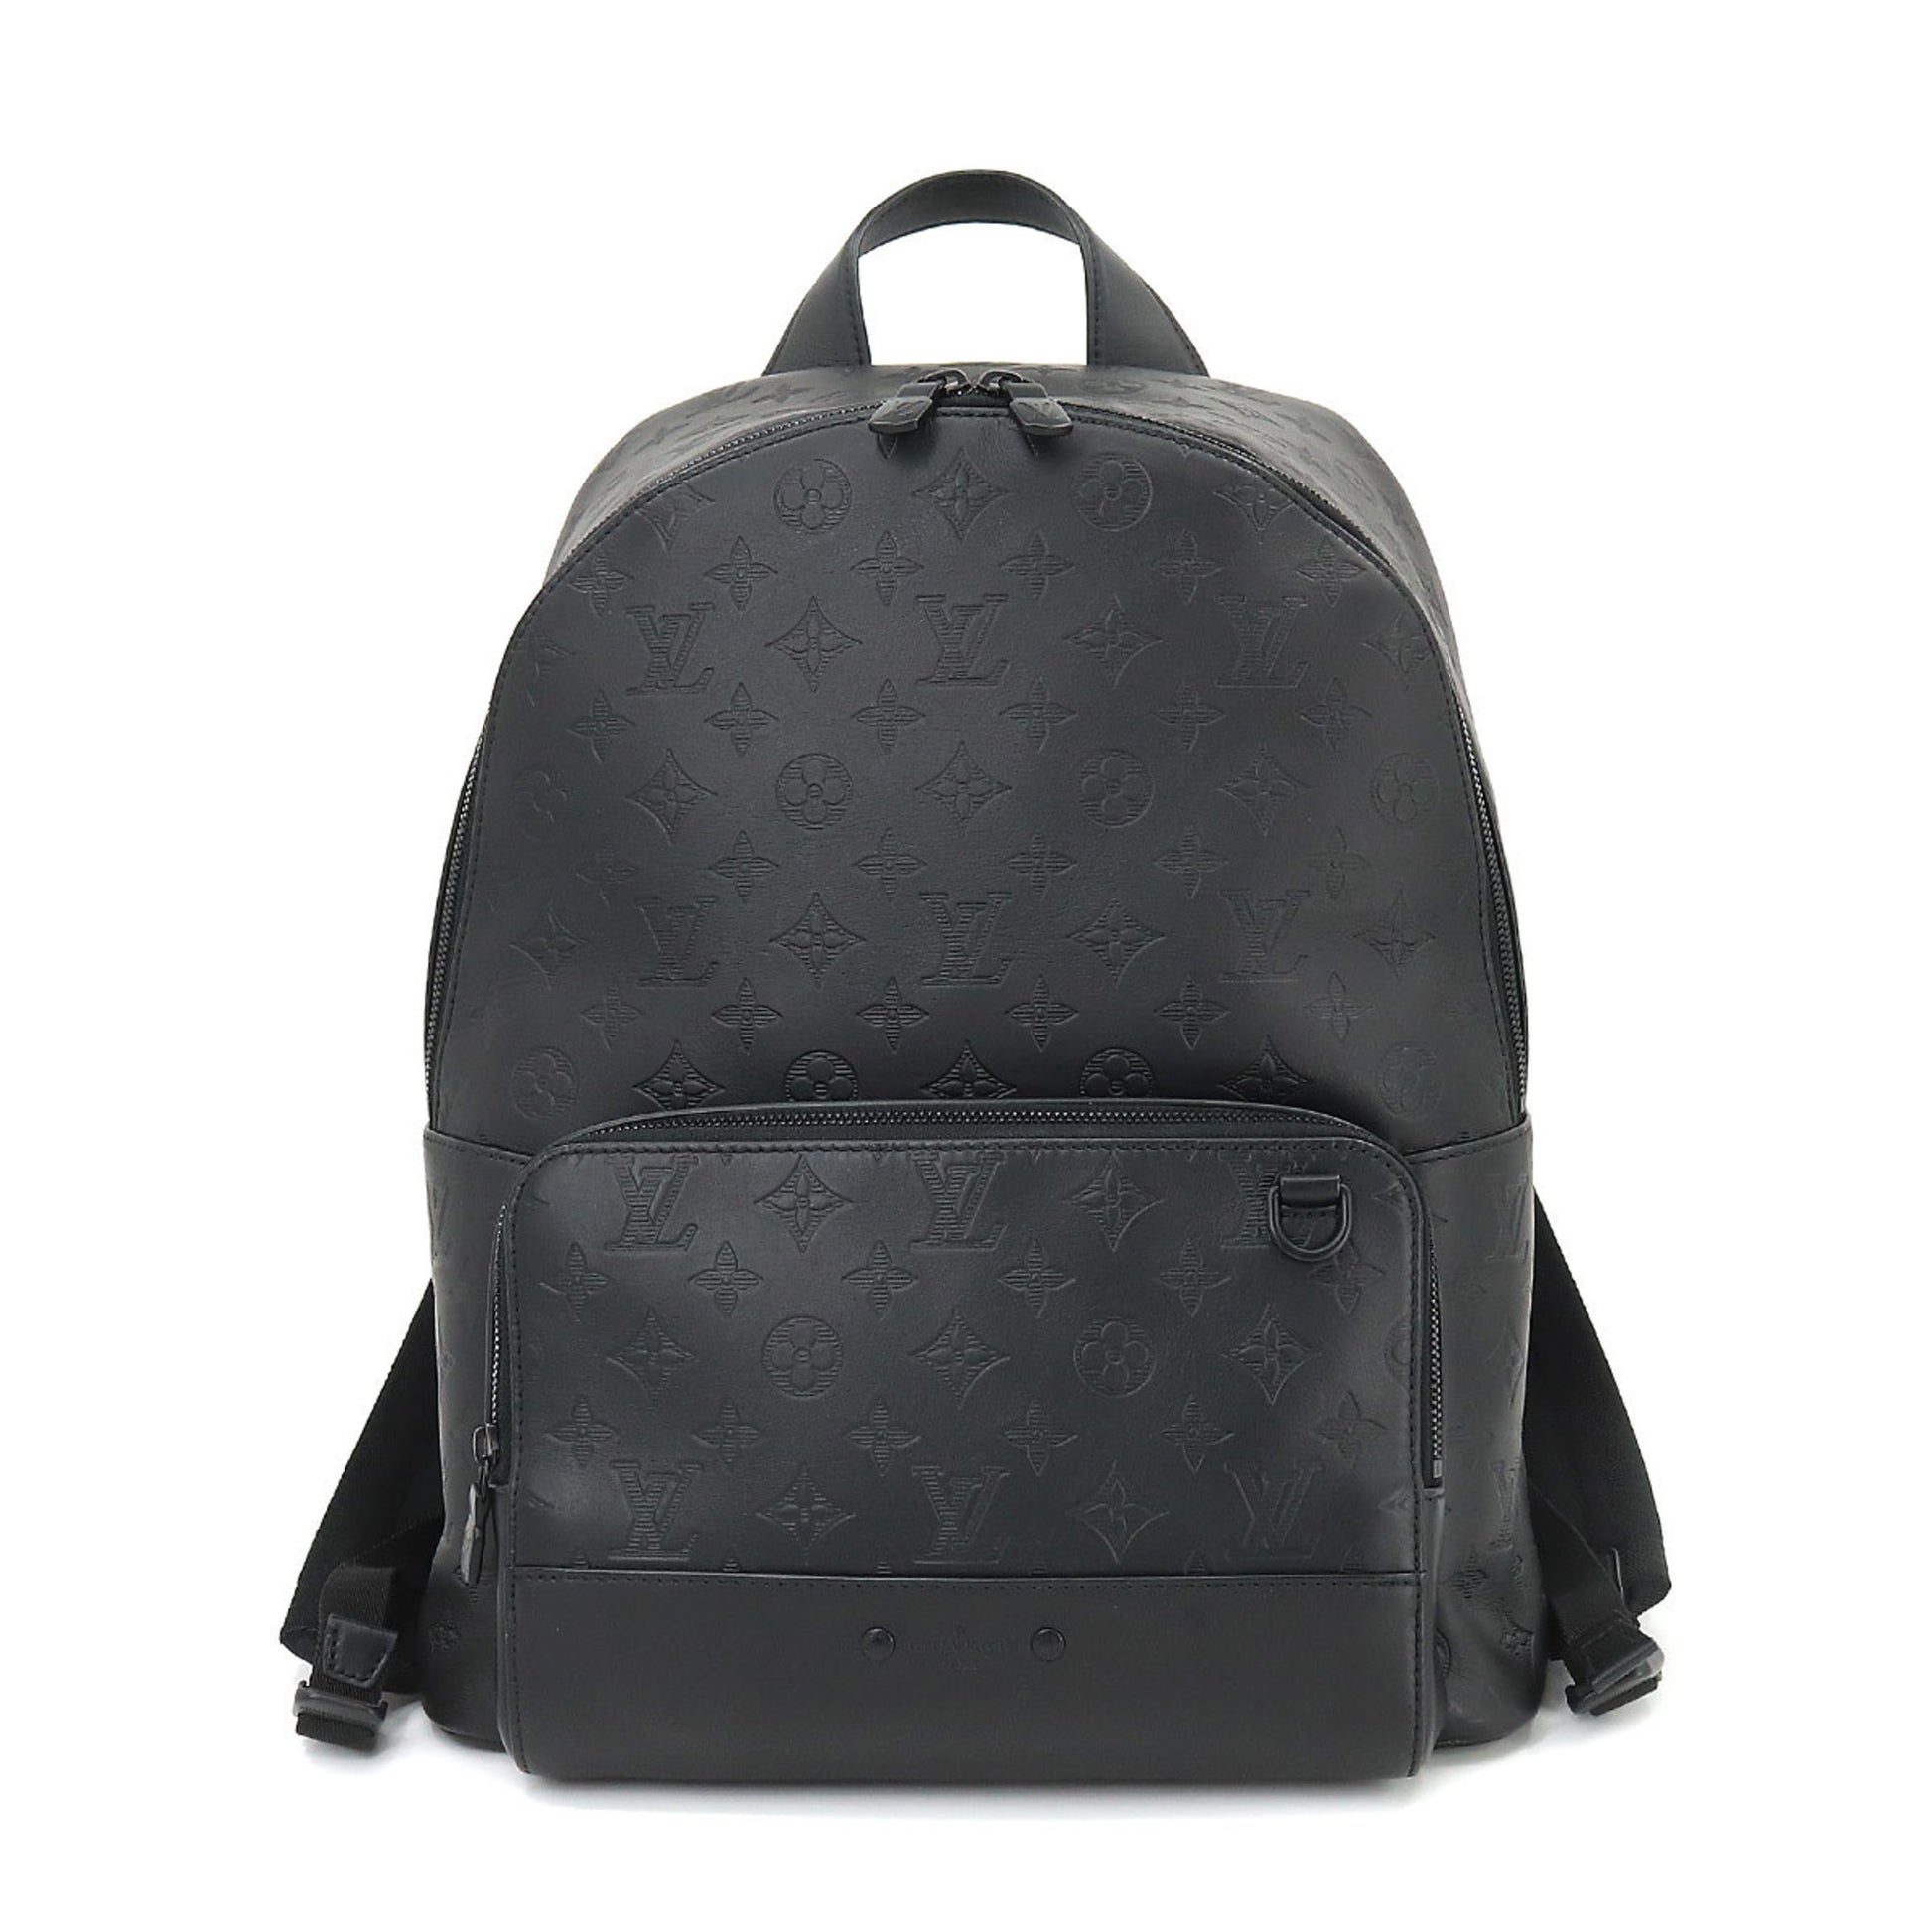 LOUIS VUITTON RACER BACKPACK MONOGRAM SHADOW GRAY LEATHER Good